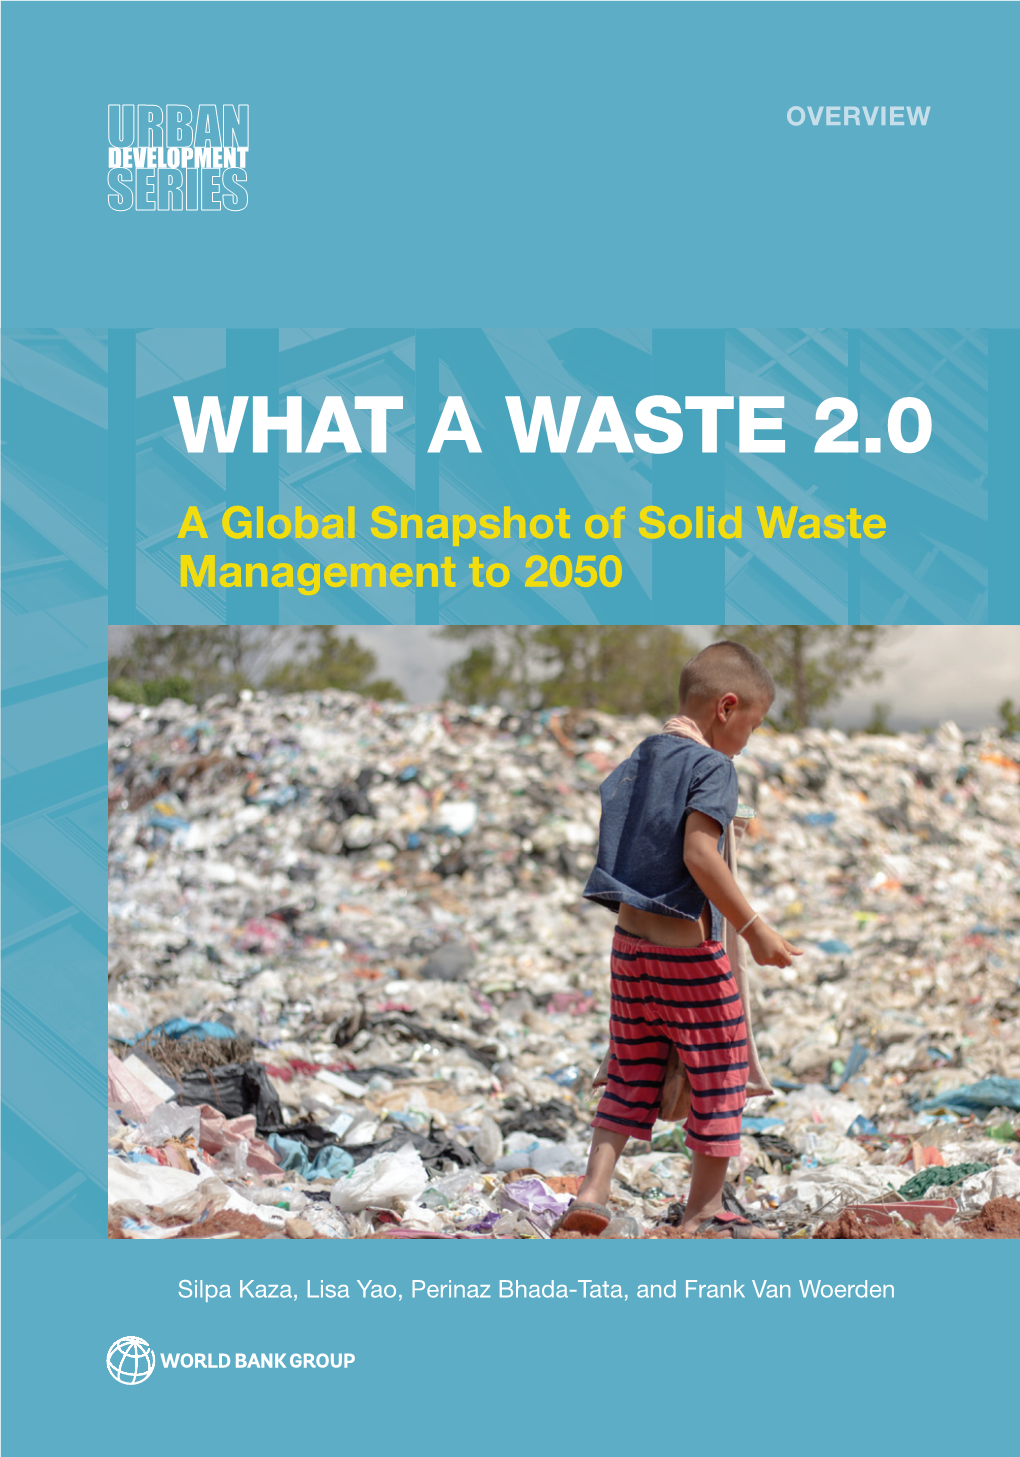 WHAT a WASTE 2.0 a Global Snapshot of Solid Waste Management to 2050